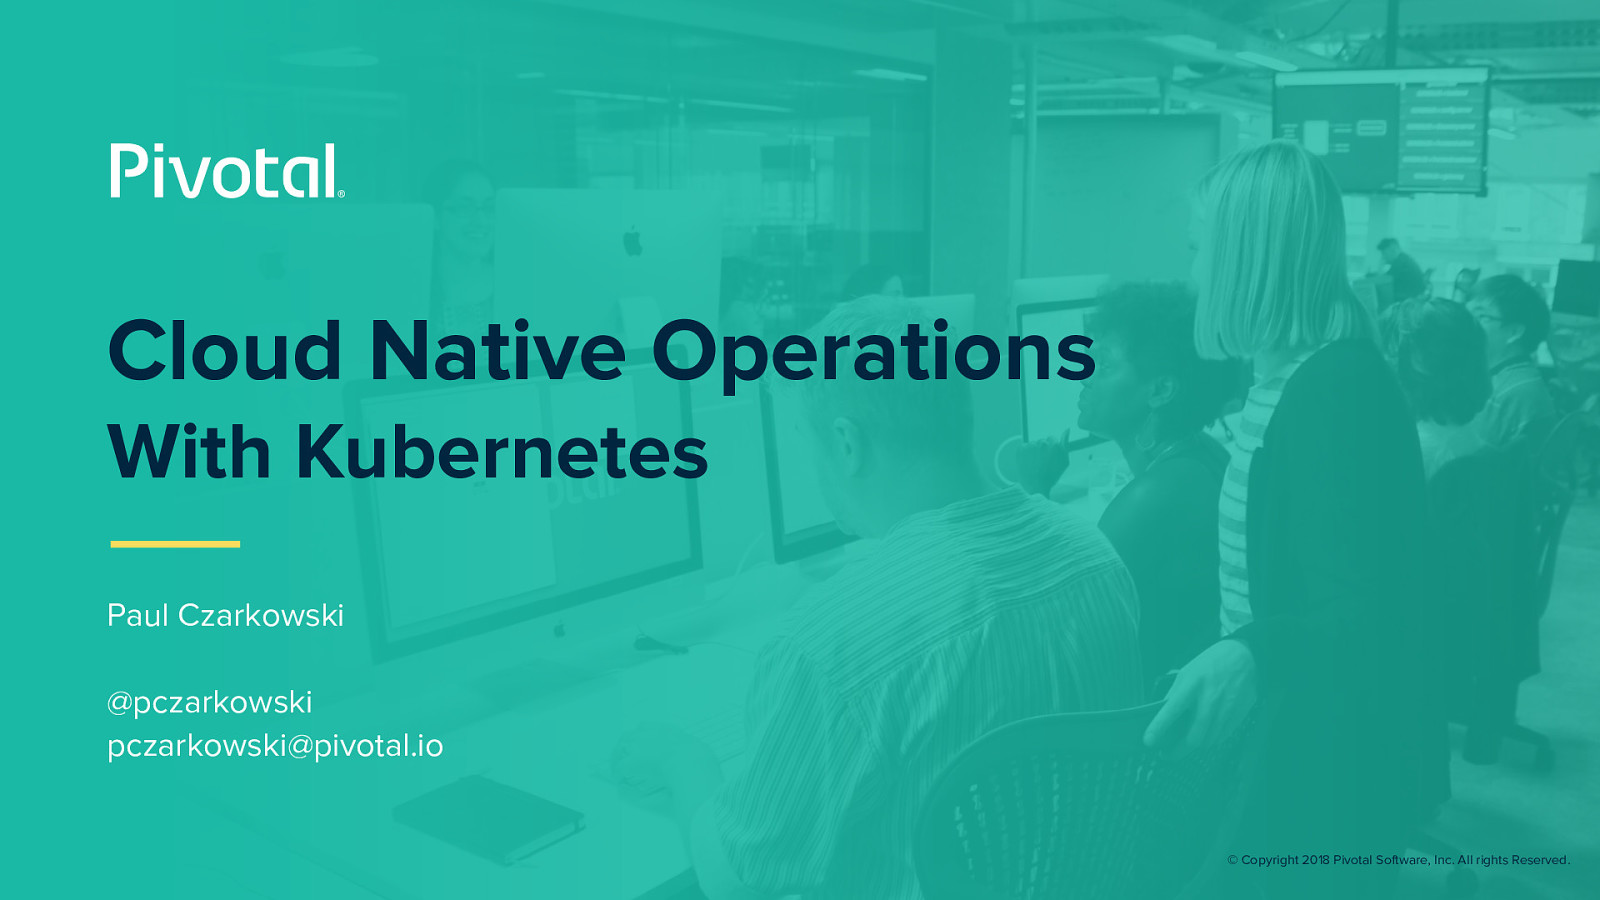 Cloud Native Operations with Kubernetes